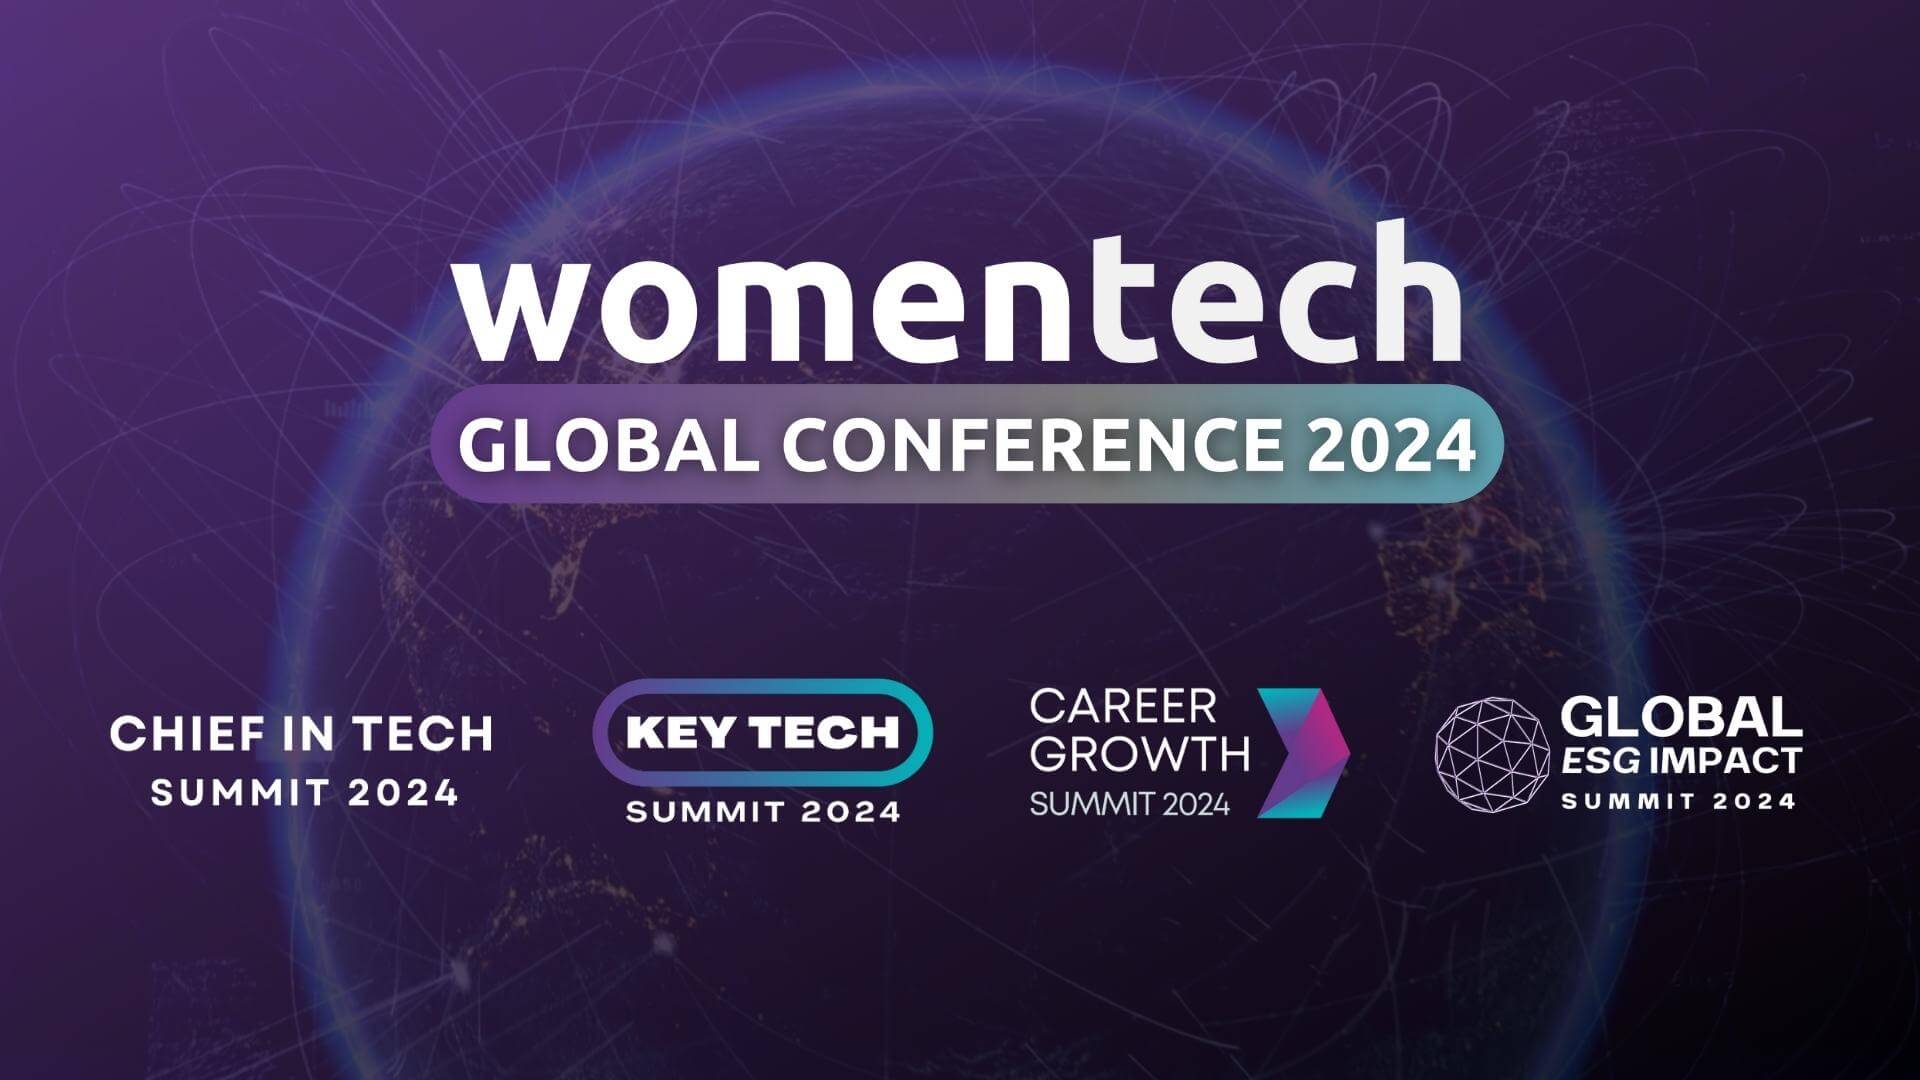 Chief in Tech Summit at the Women in Tech Conference 2024 Virtual